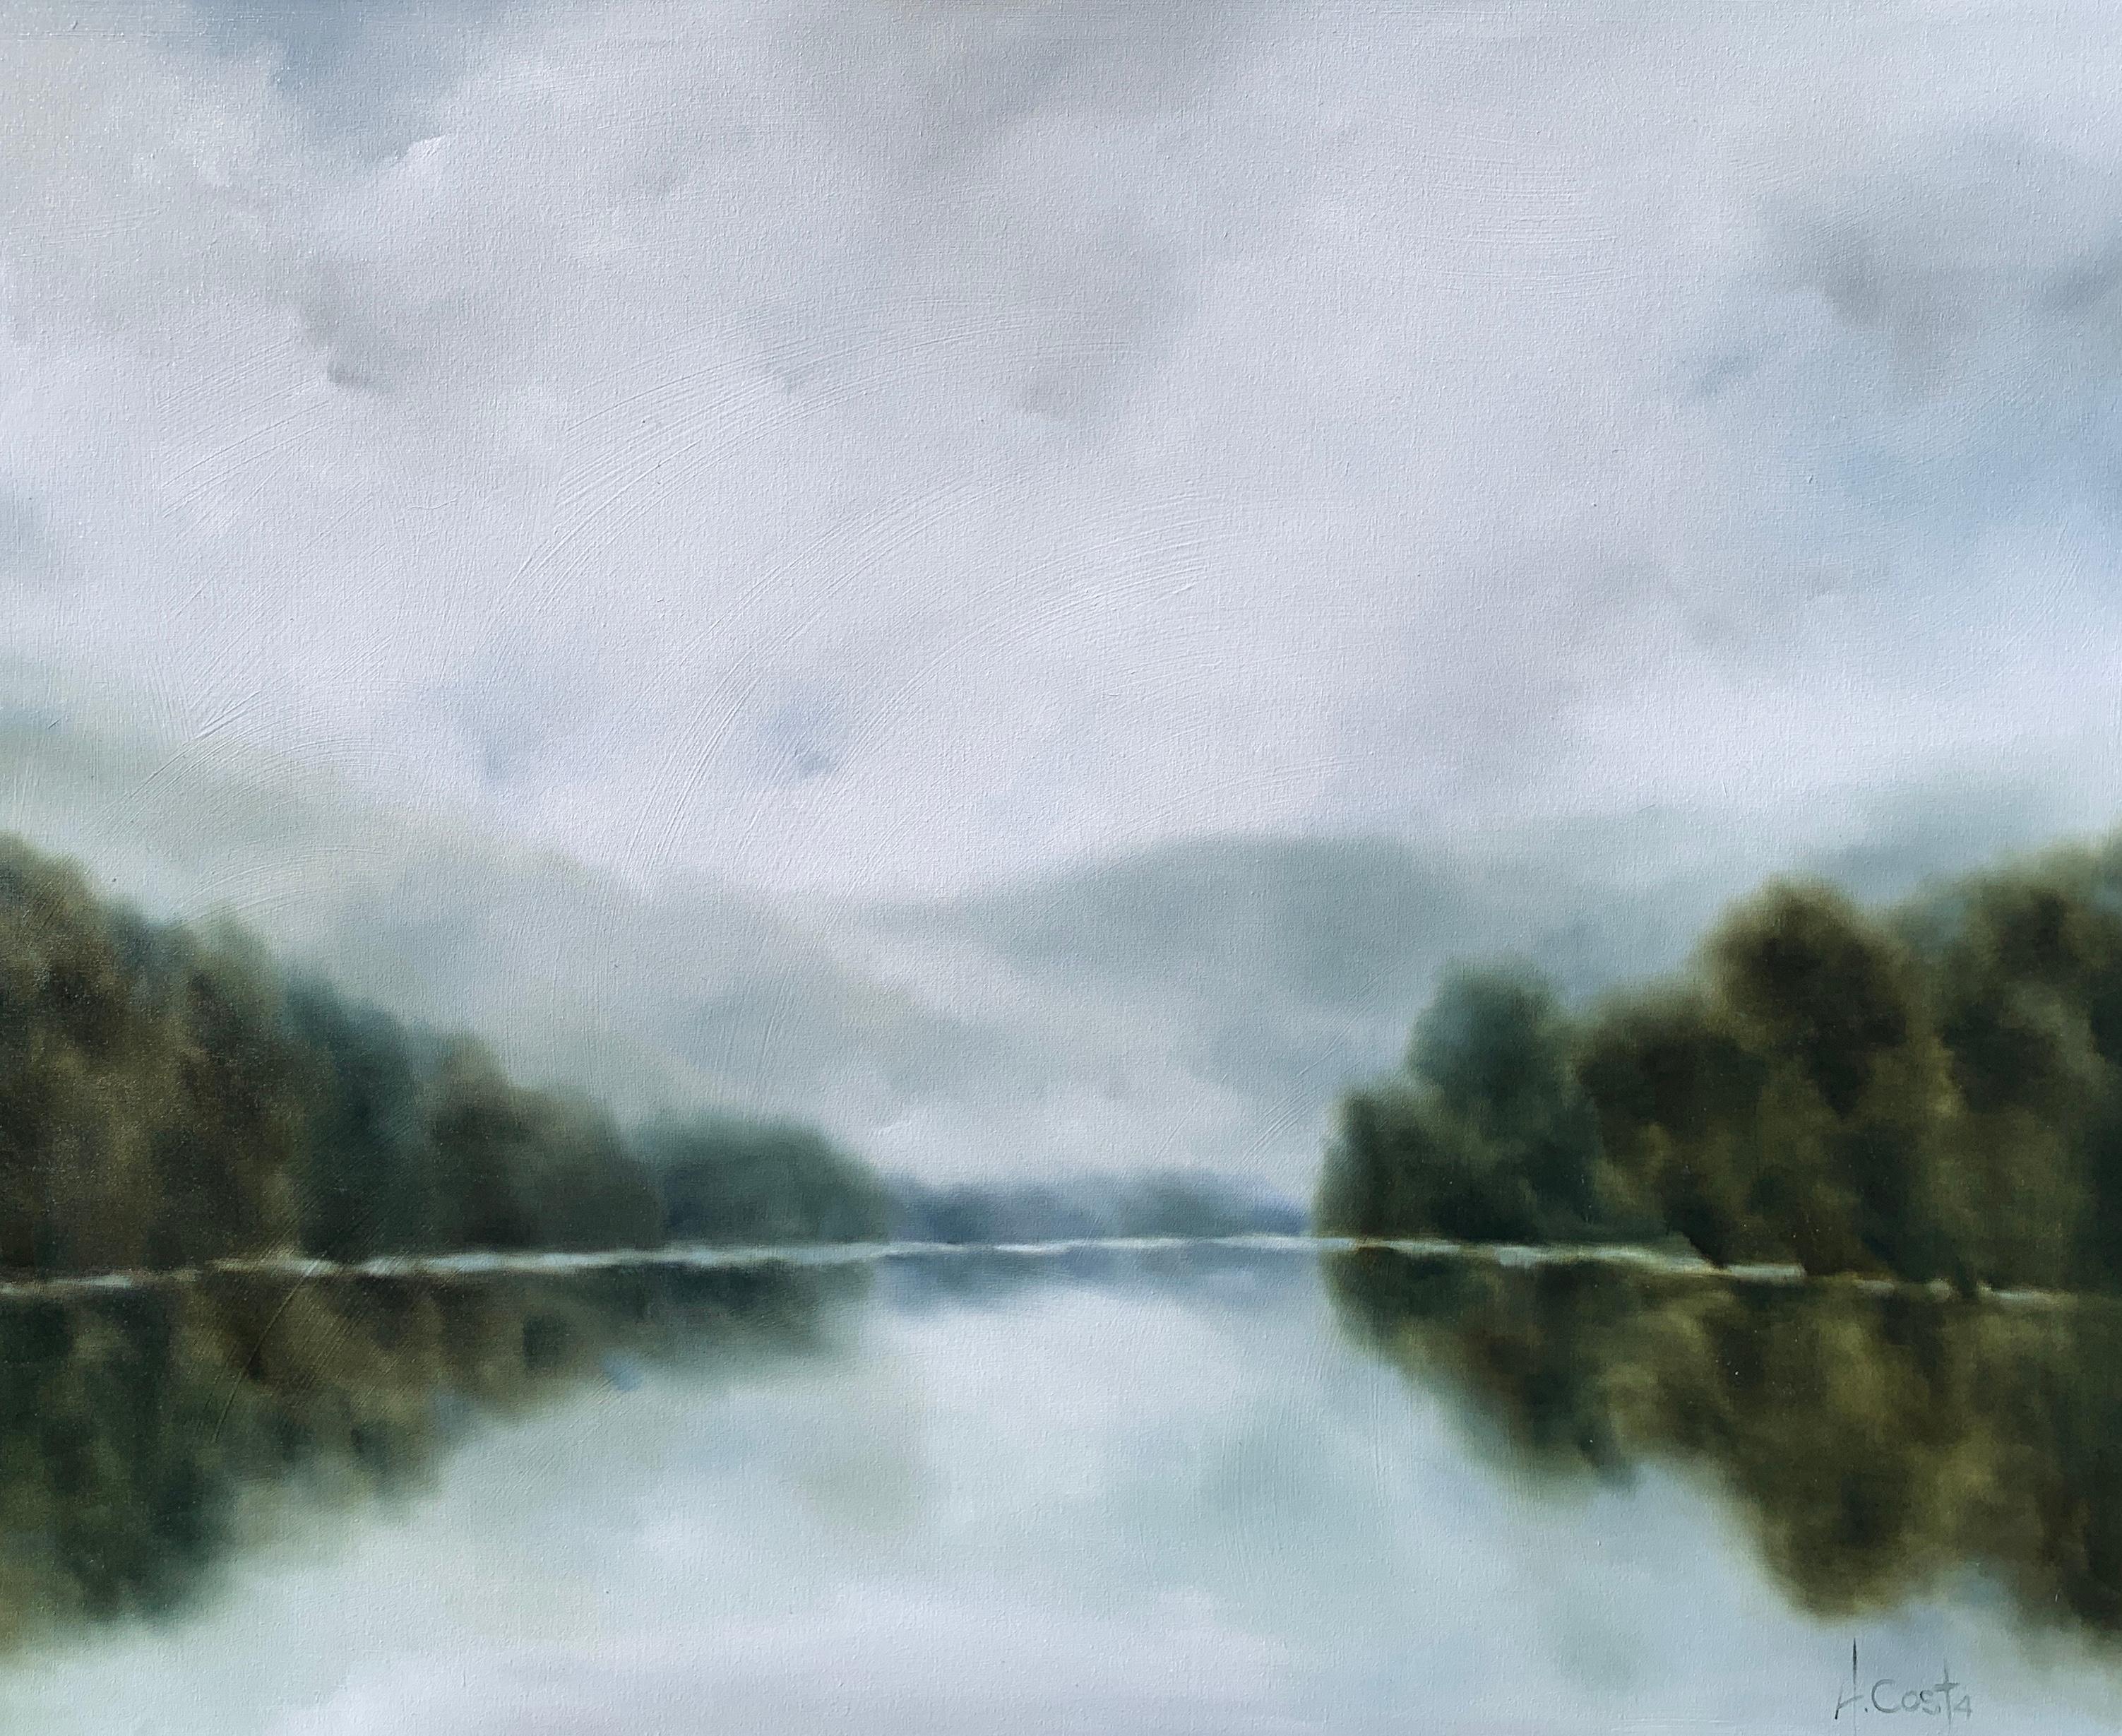 'Morning Air' is a large Impressionist oil on gessoed canvas landscape painting created by American artist Andrea Costa in 2020. Featuring a soft palette mostly made of grey, purple, green light blue and white colors, this horizontal painting exudes